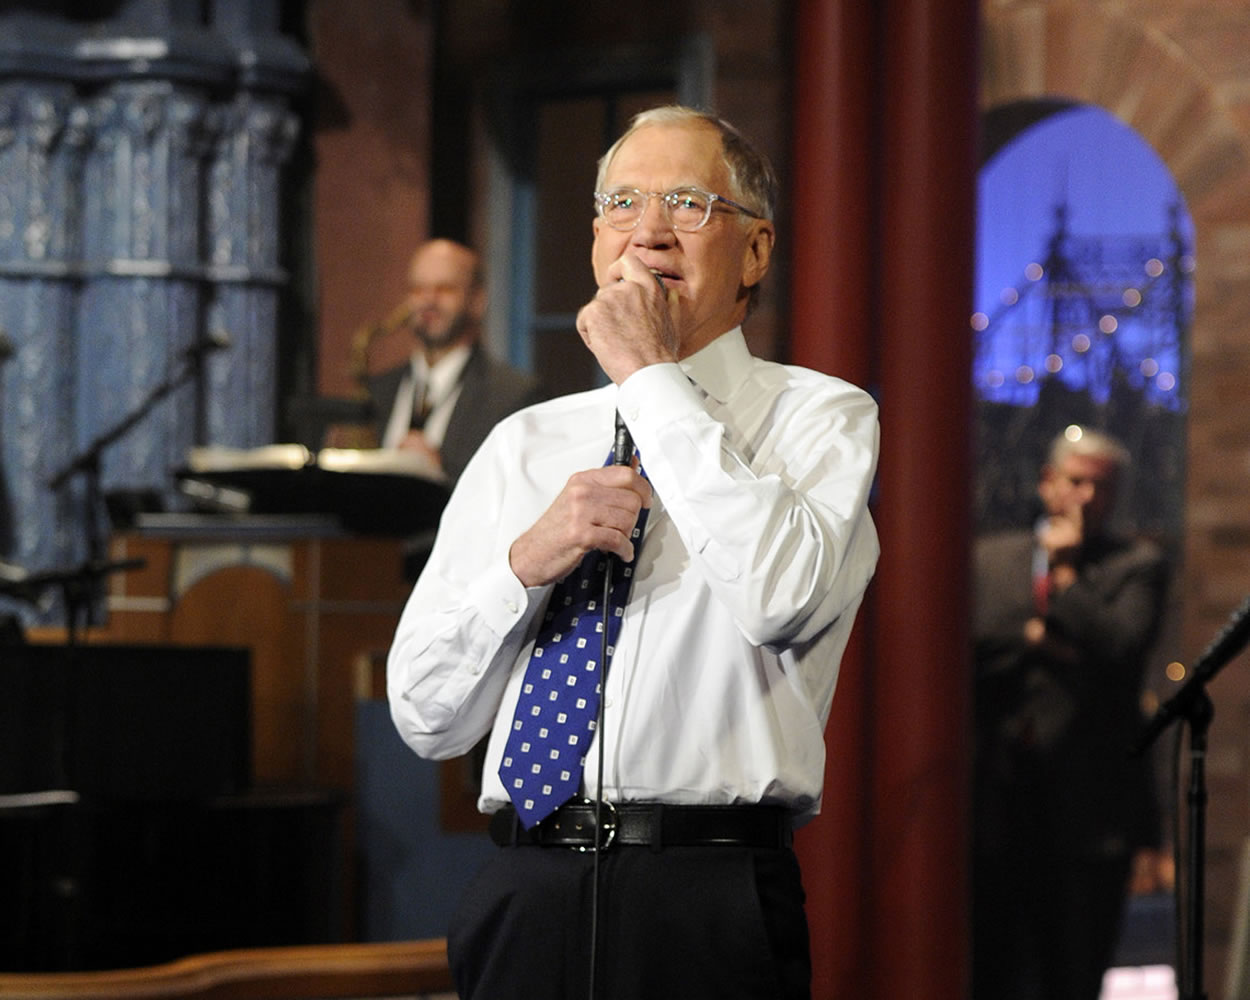 David Letterman appears during a taping of his final &quot;Late Show with David Letterman,&quot; on May 20, 2015 at the Ed Sullivan Theater in New York. (Jeffrey R.